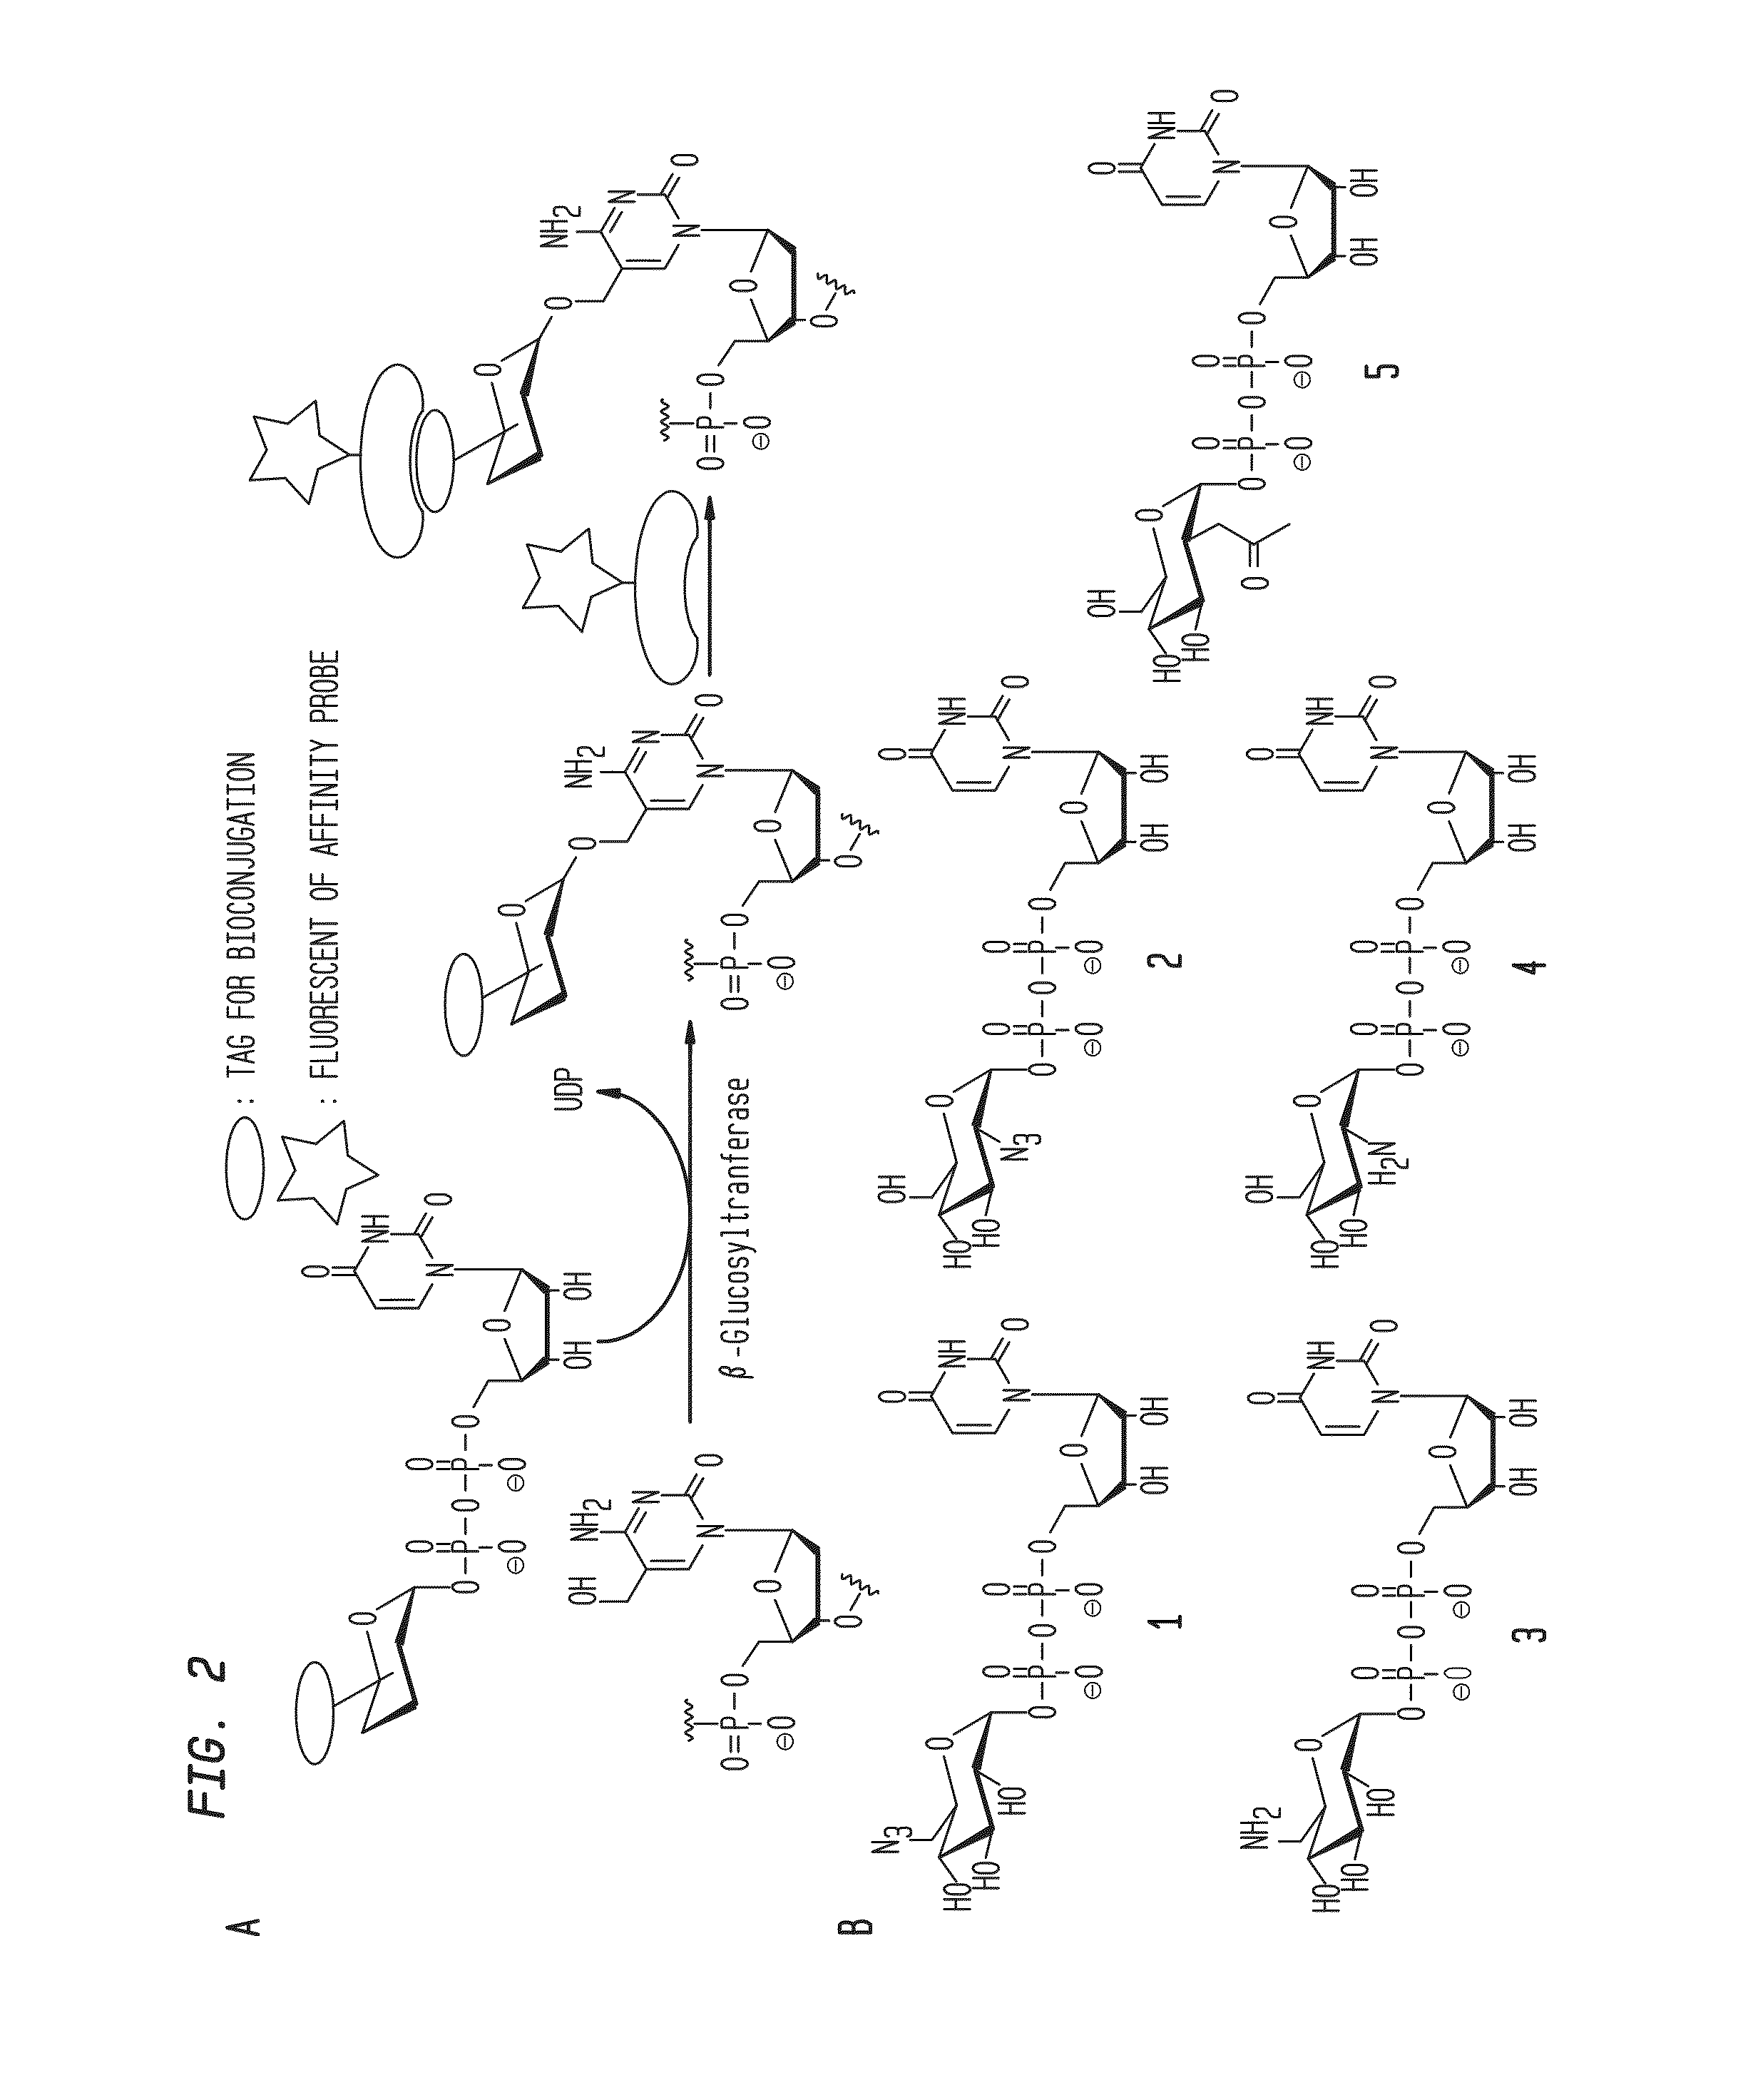 Compositions and Methods for the Transfer of a Hexosamine to a Modified Nucleotide in a Nucleic Acid